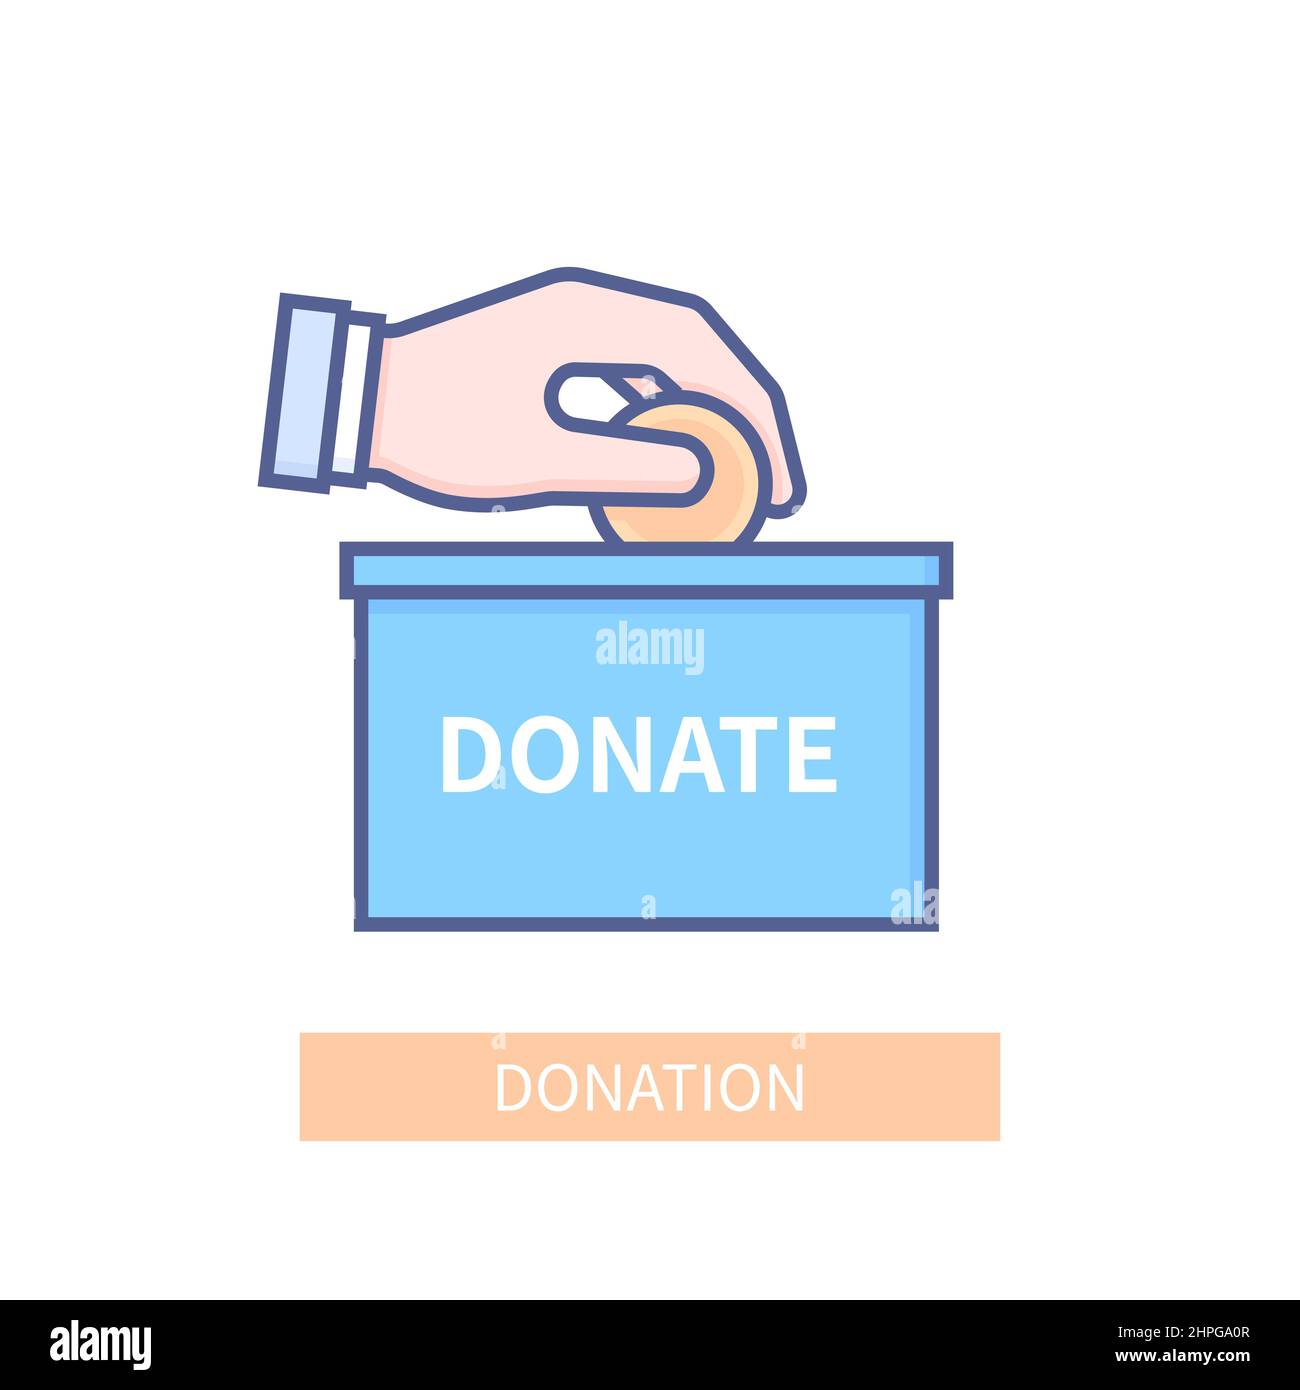 Donate - modern colored line design style icon on white background. Neat detailed image of hand dropping a coin into a common fundraising box. Charity Stock Vector